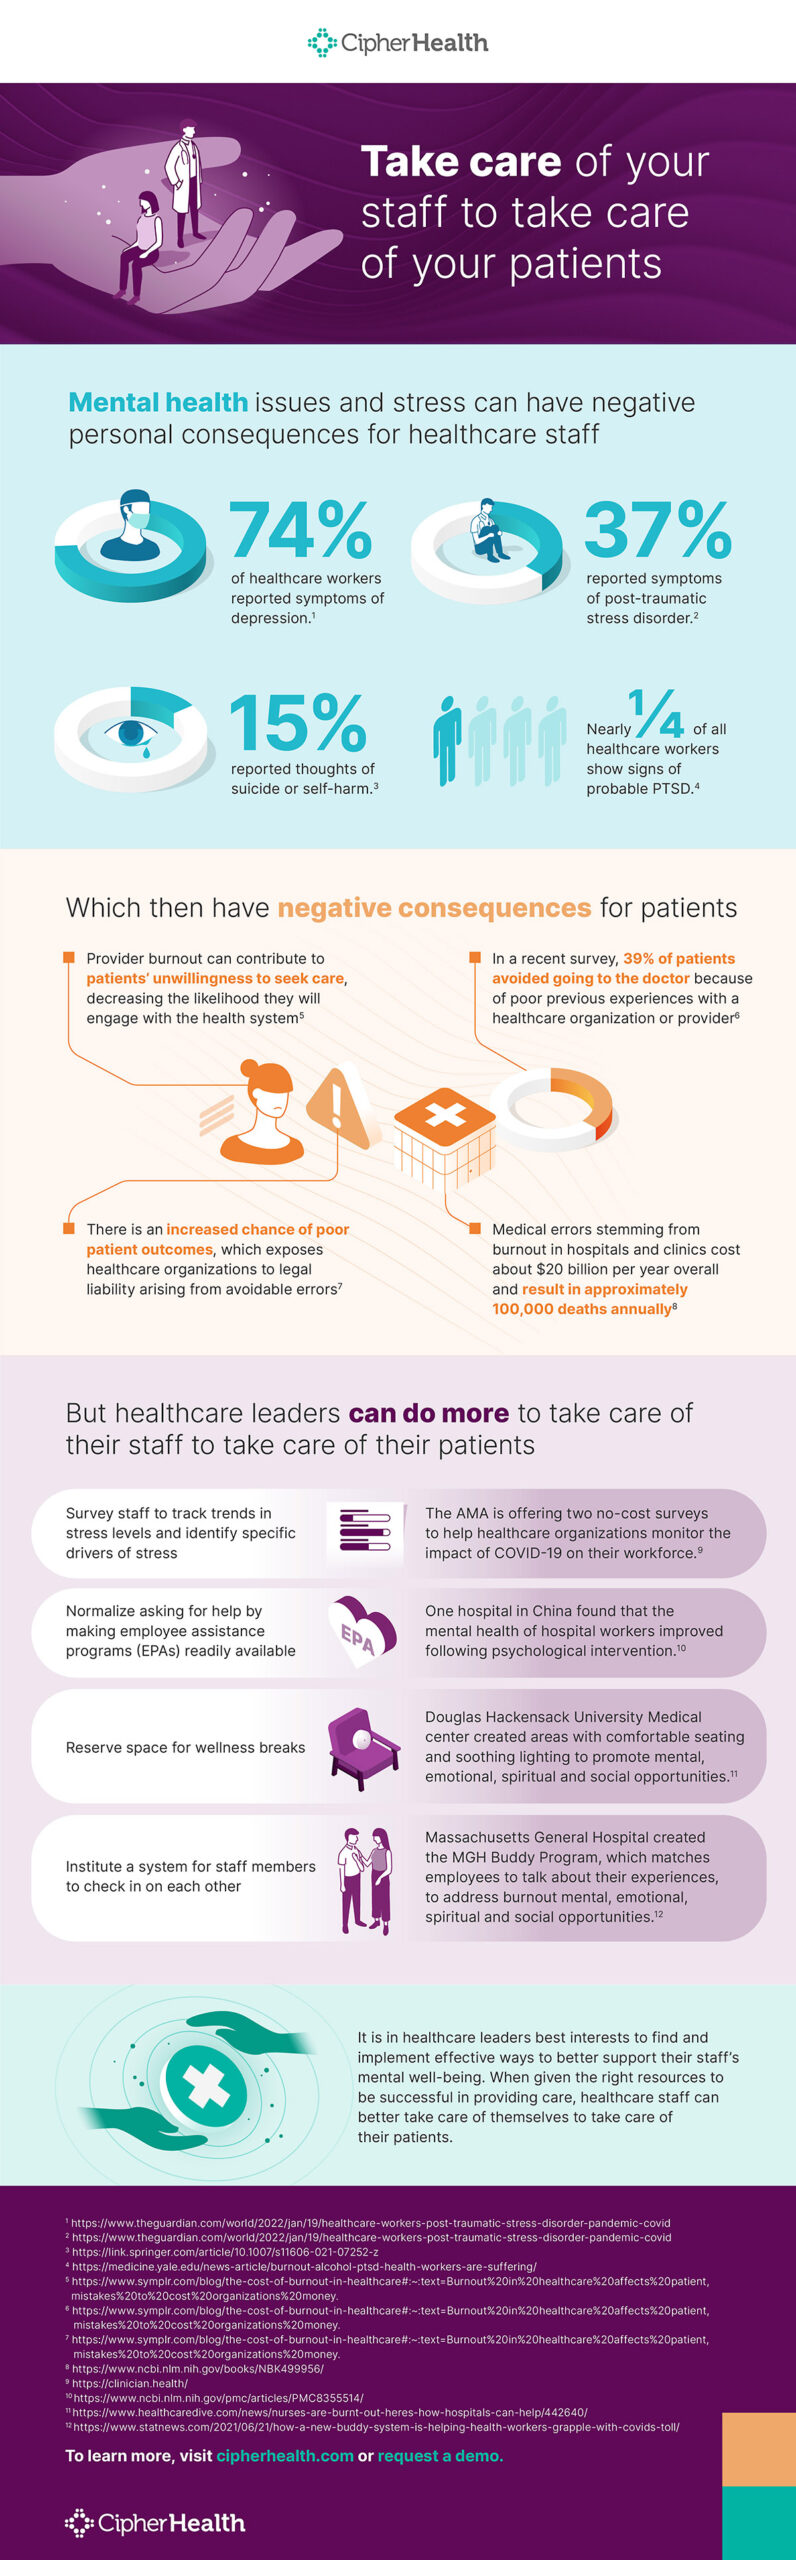 Cipherhealth Infographic Take Care Of Your Staff